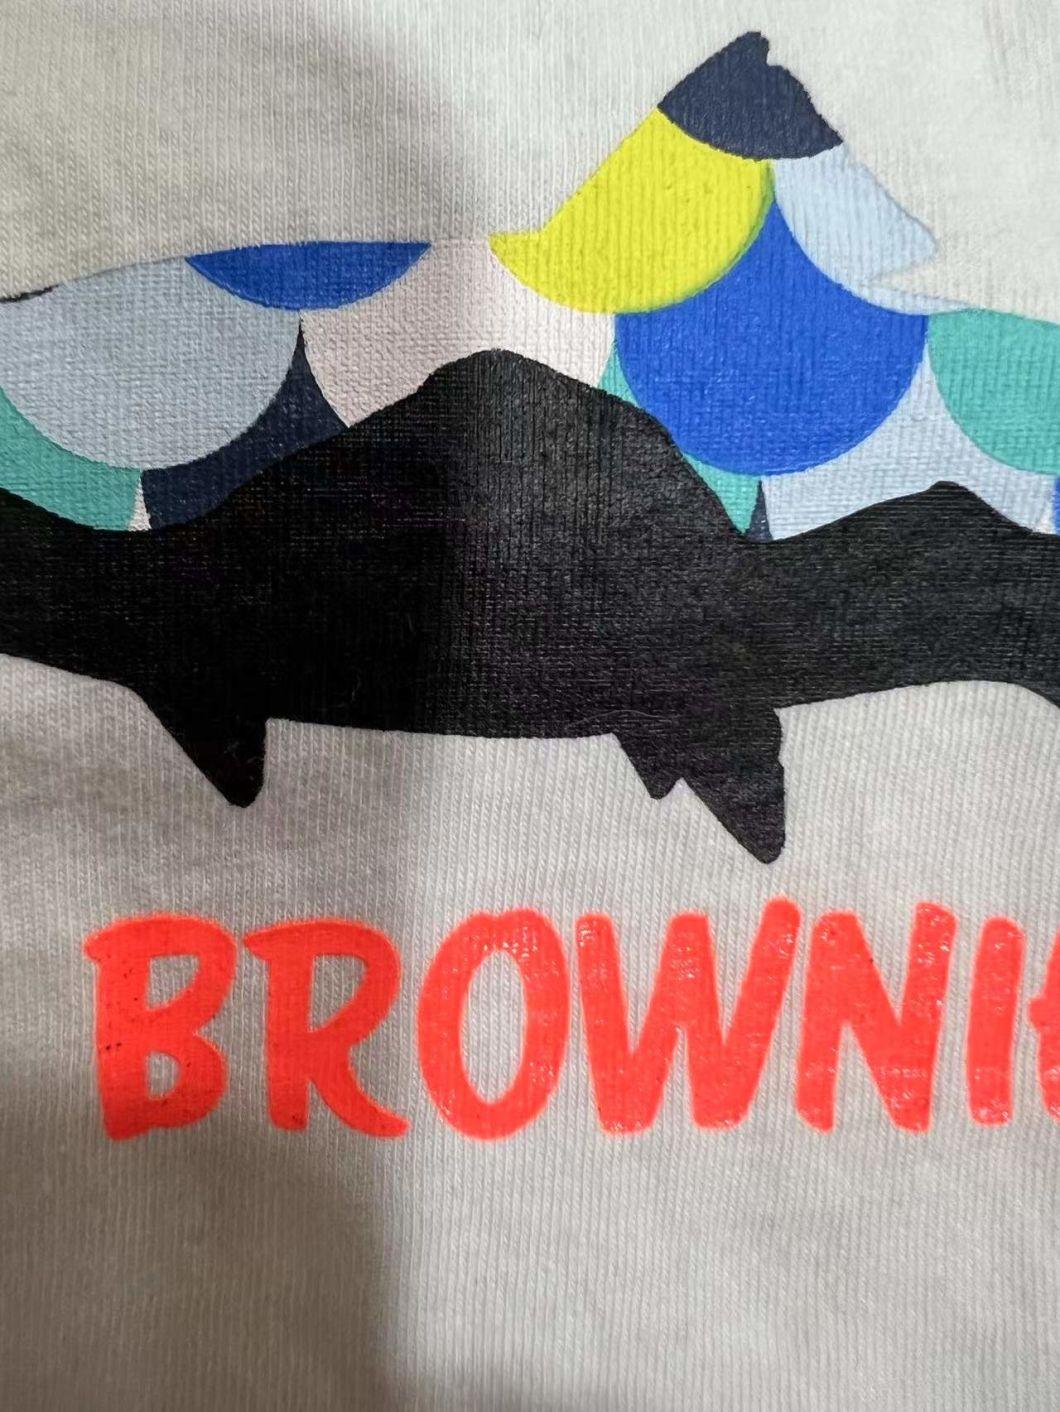 "Brownie′ S Enjoy" Printing Sport Jersey Wholesale Dog Clothes Pet Products